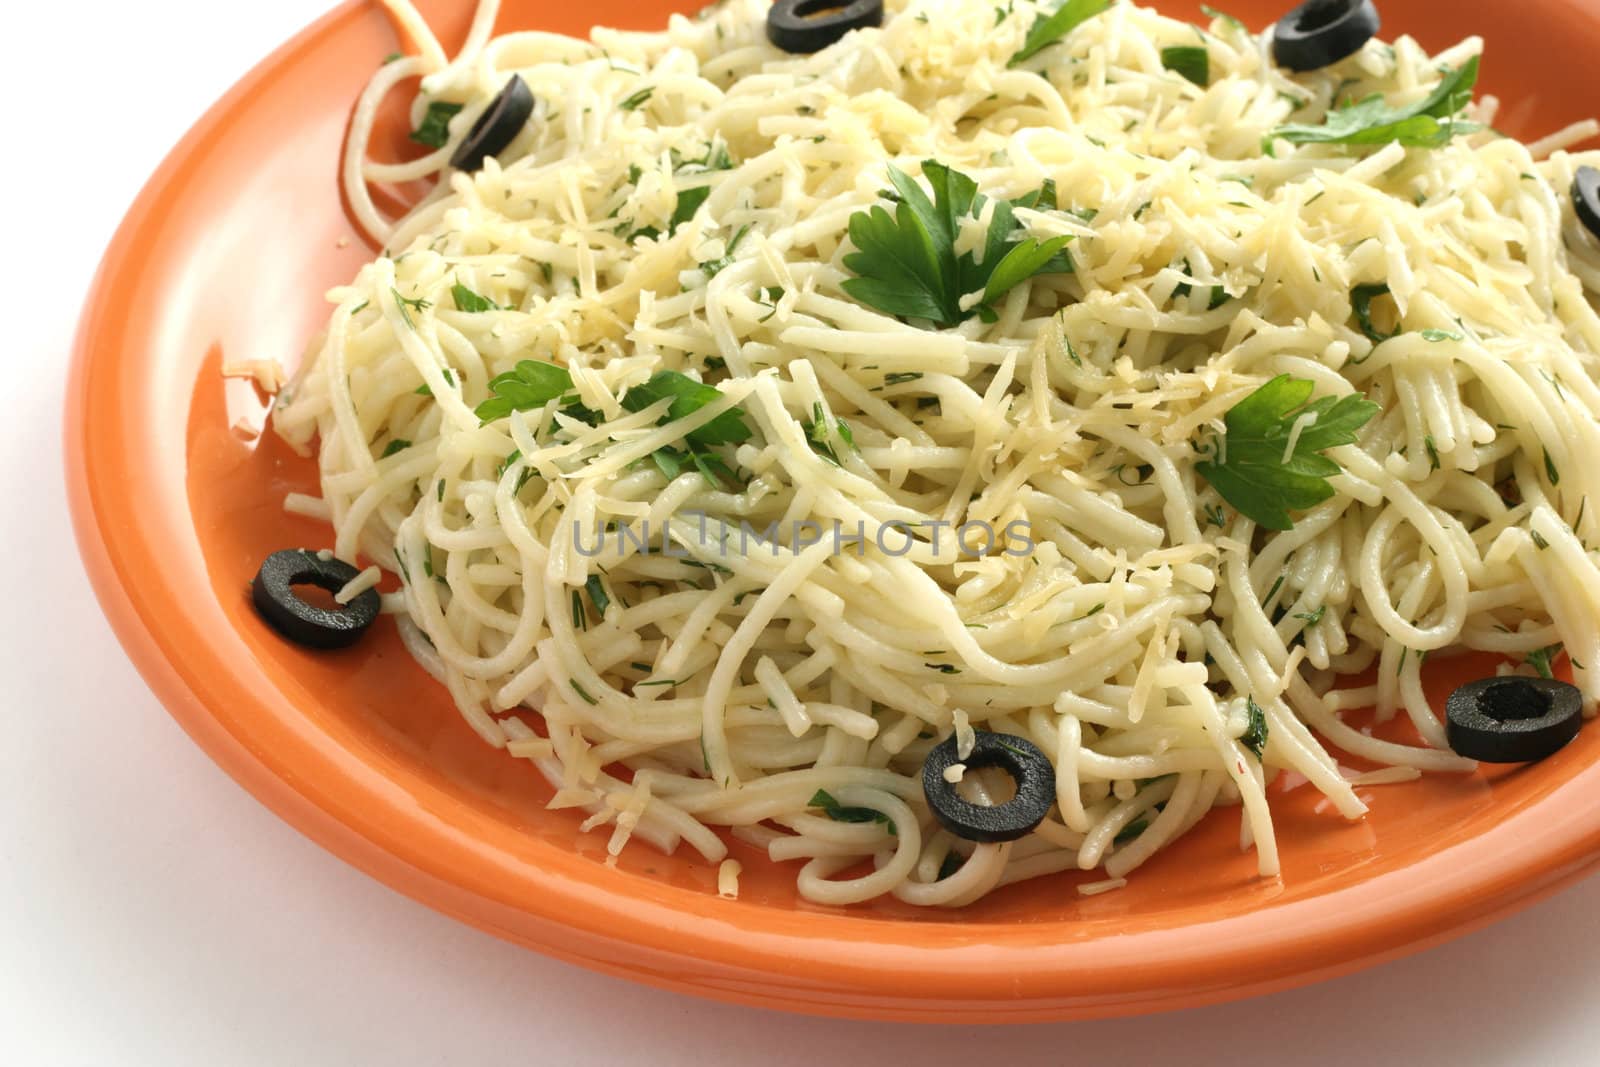 Spaghetti with cheese and parsley